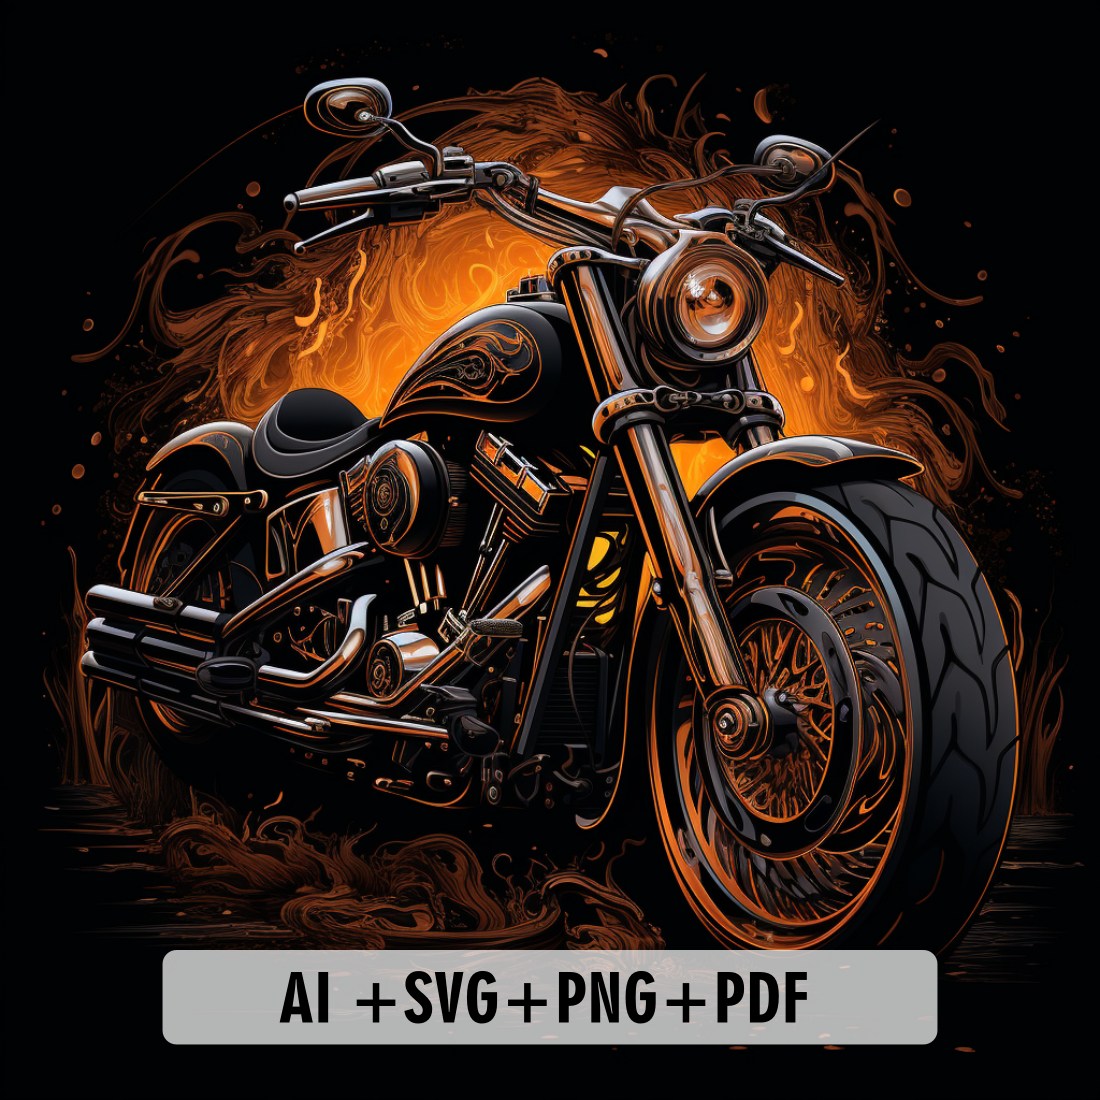 Harley Big Motorcycle for t-shirt design cover image.